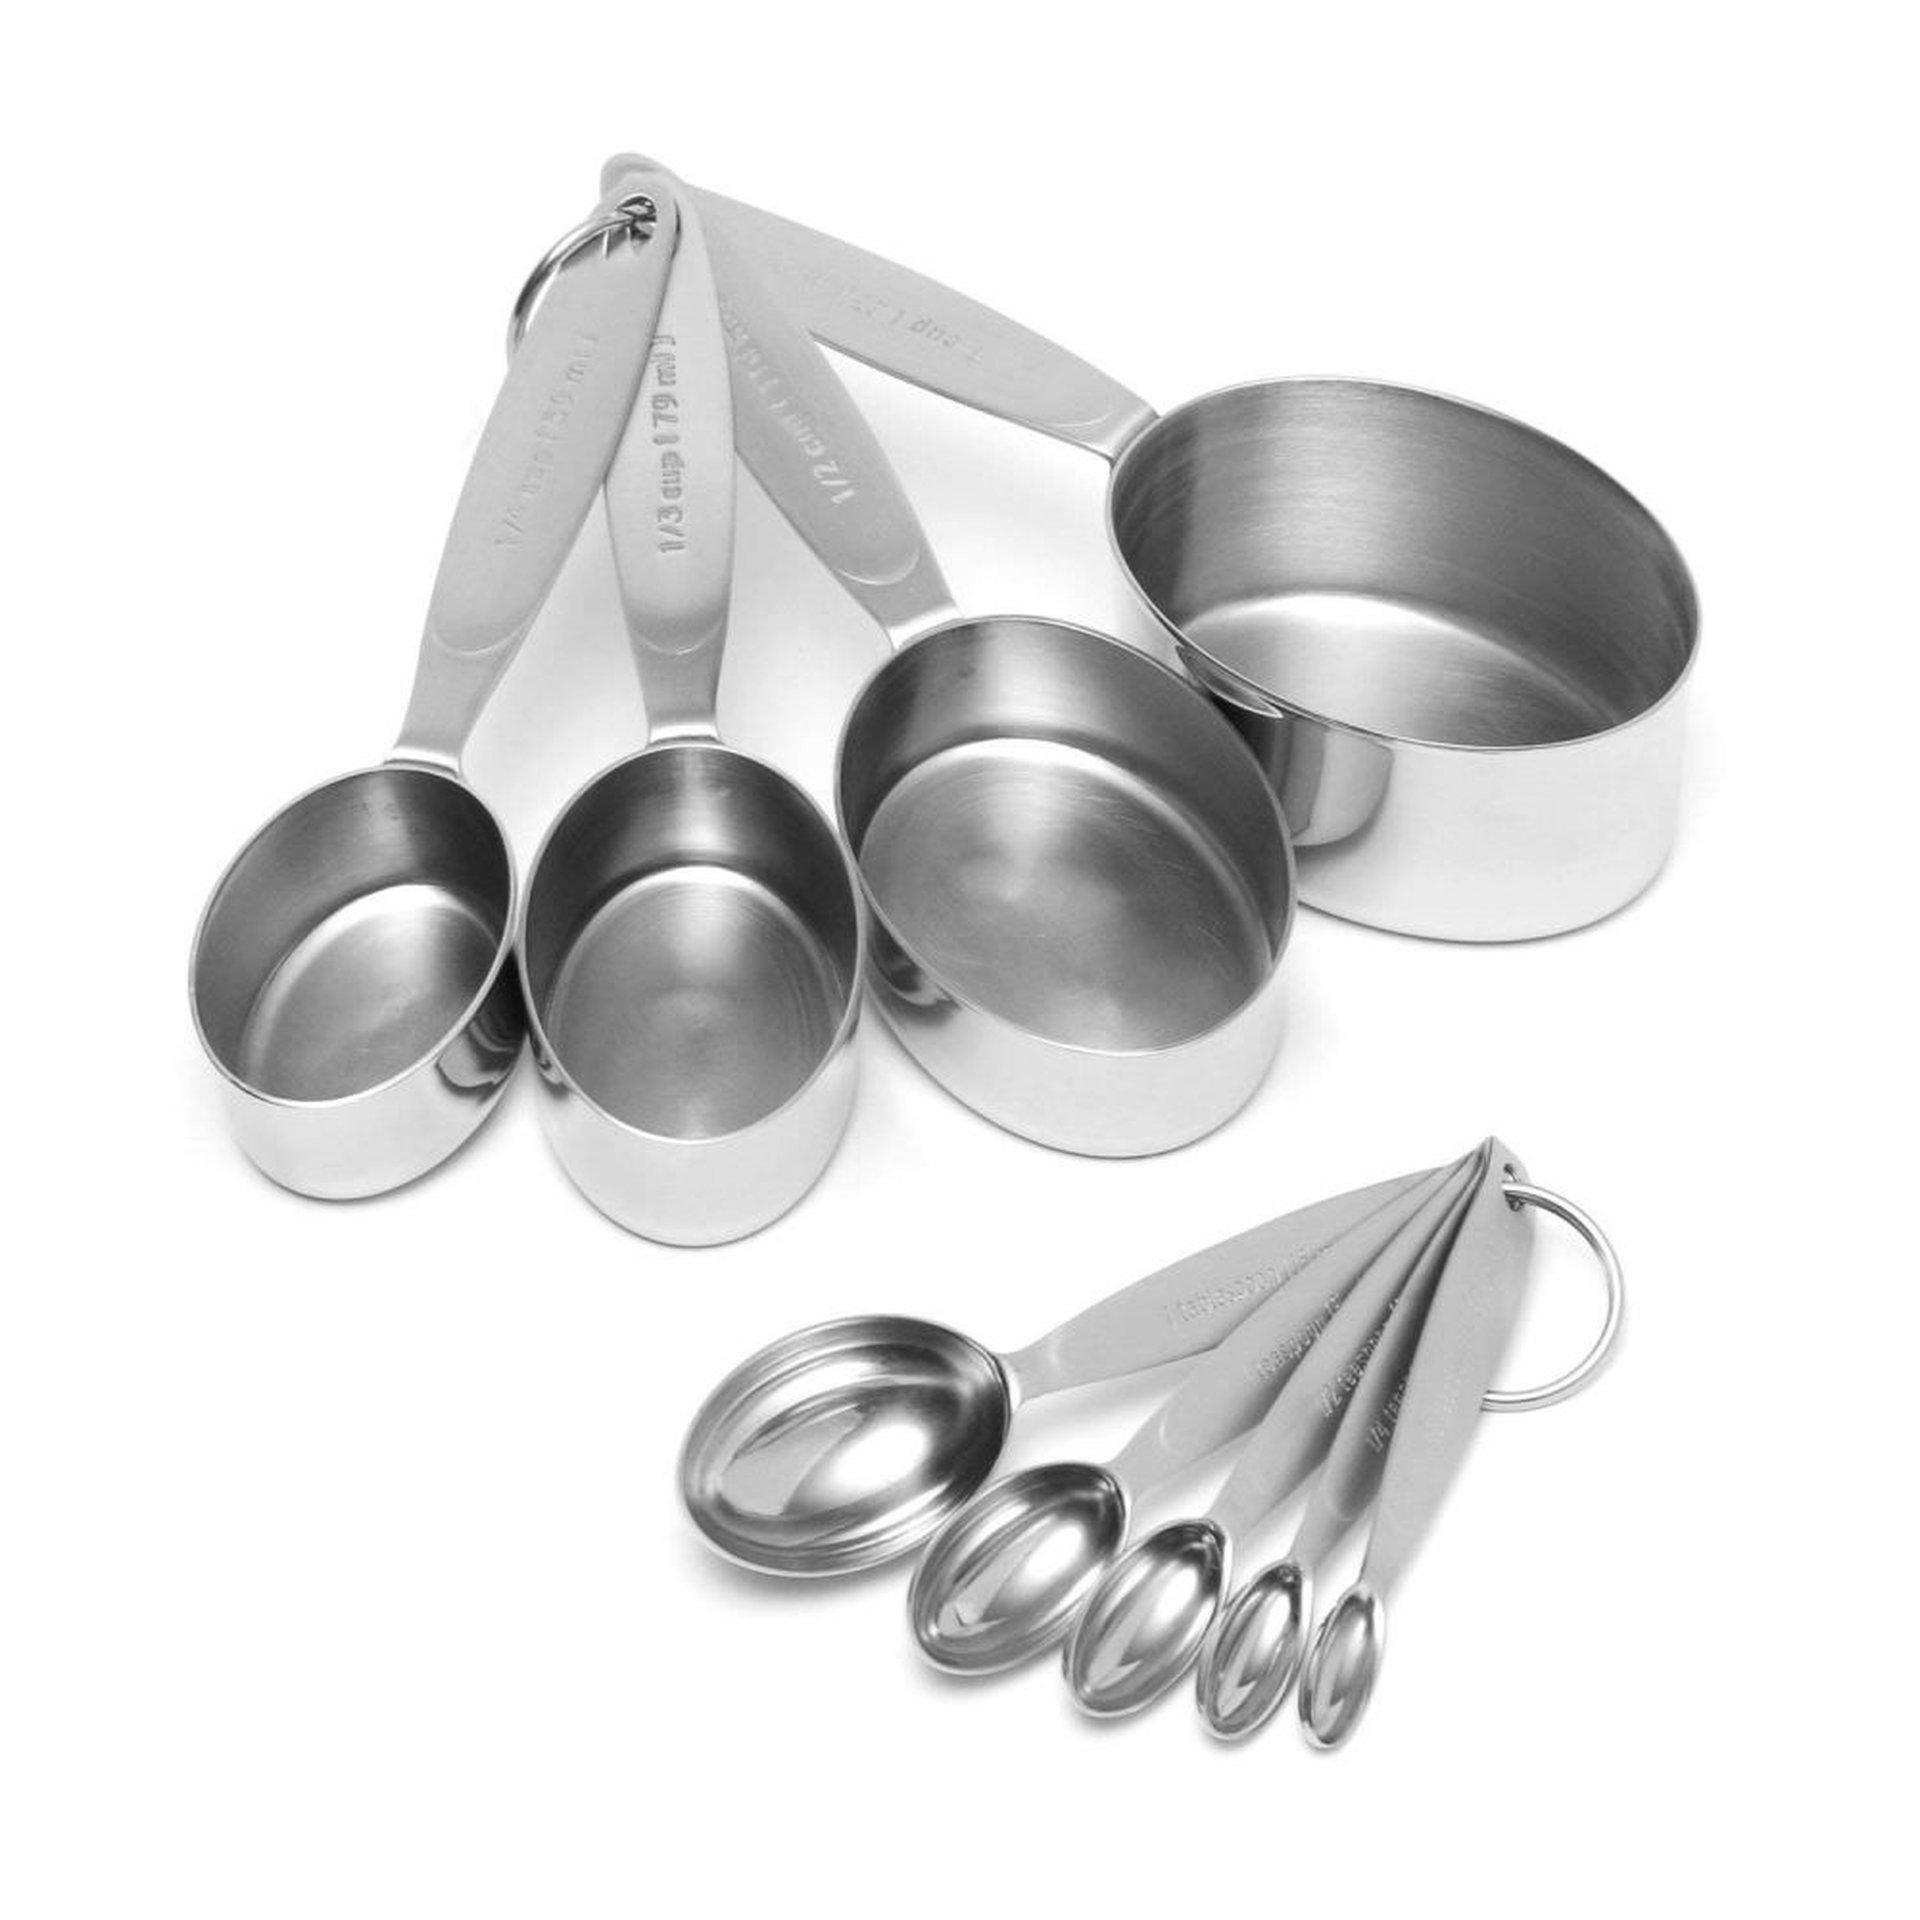 Cuisipro Stainless Steel Measuring Cup Set, 4 Piece : Target